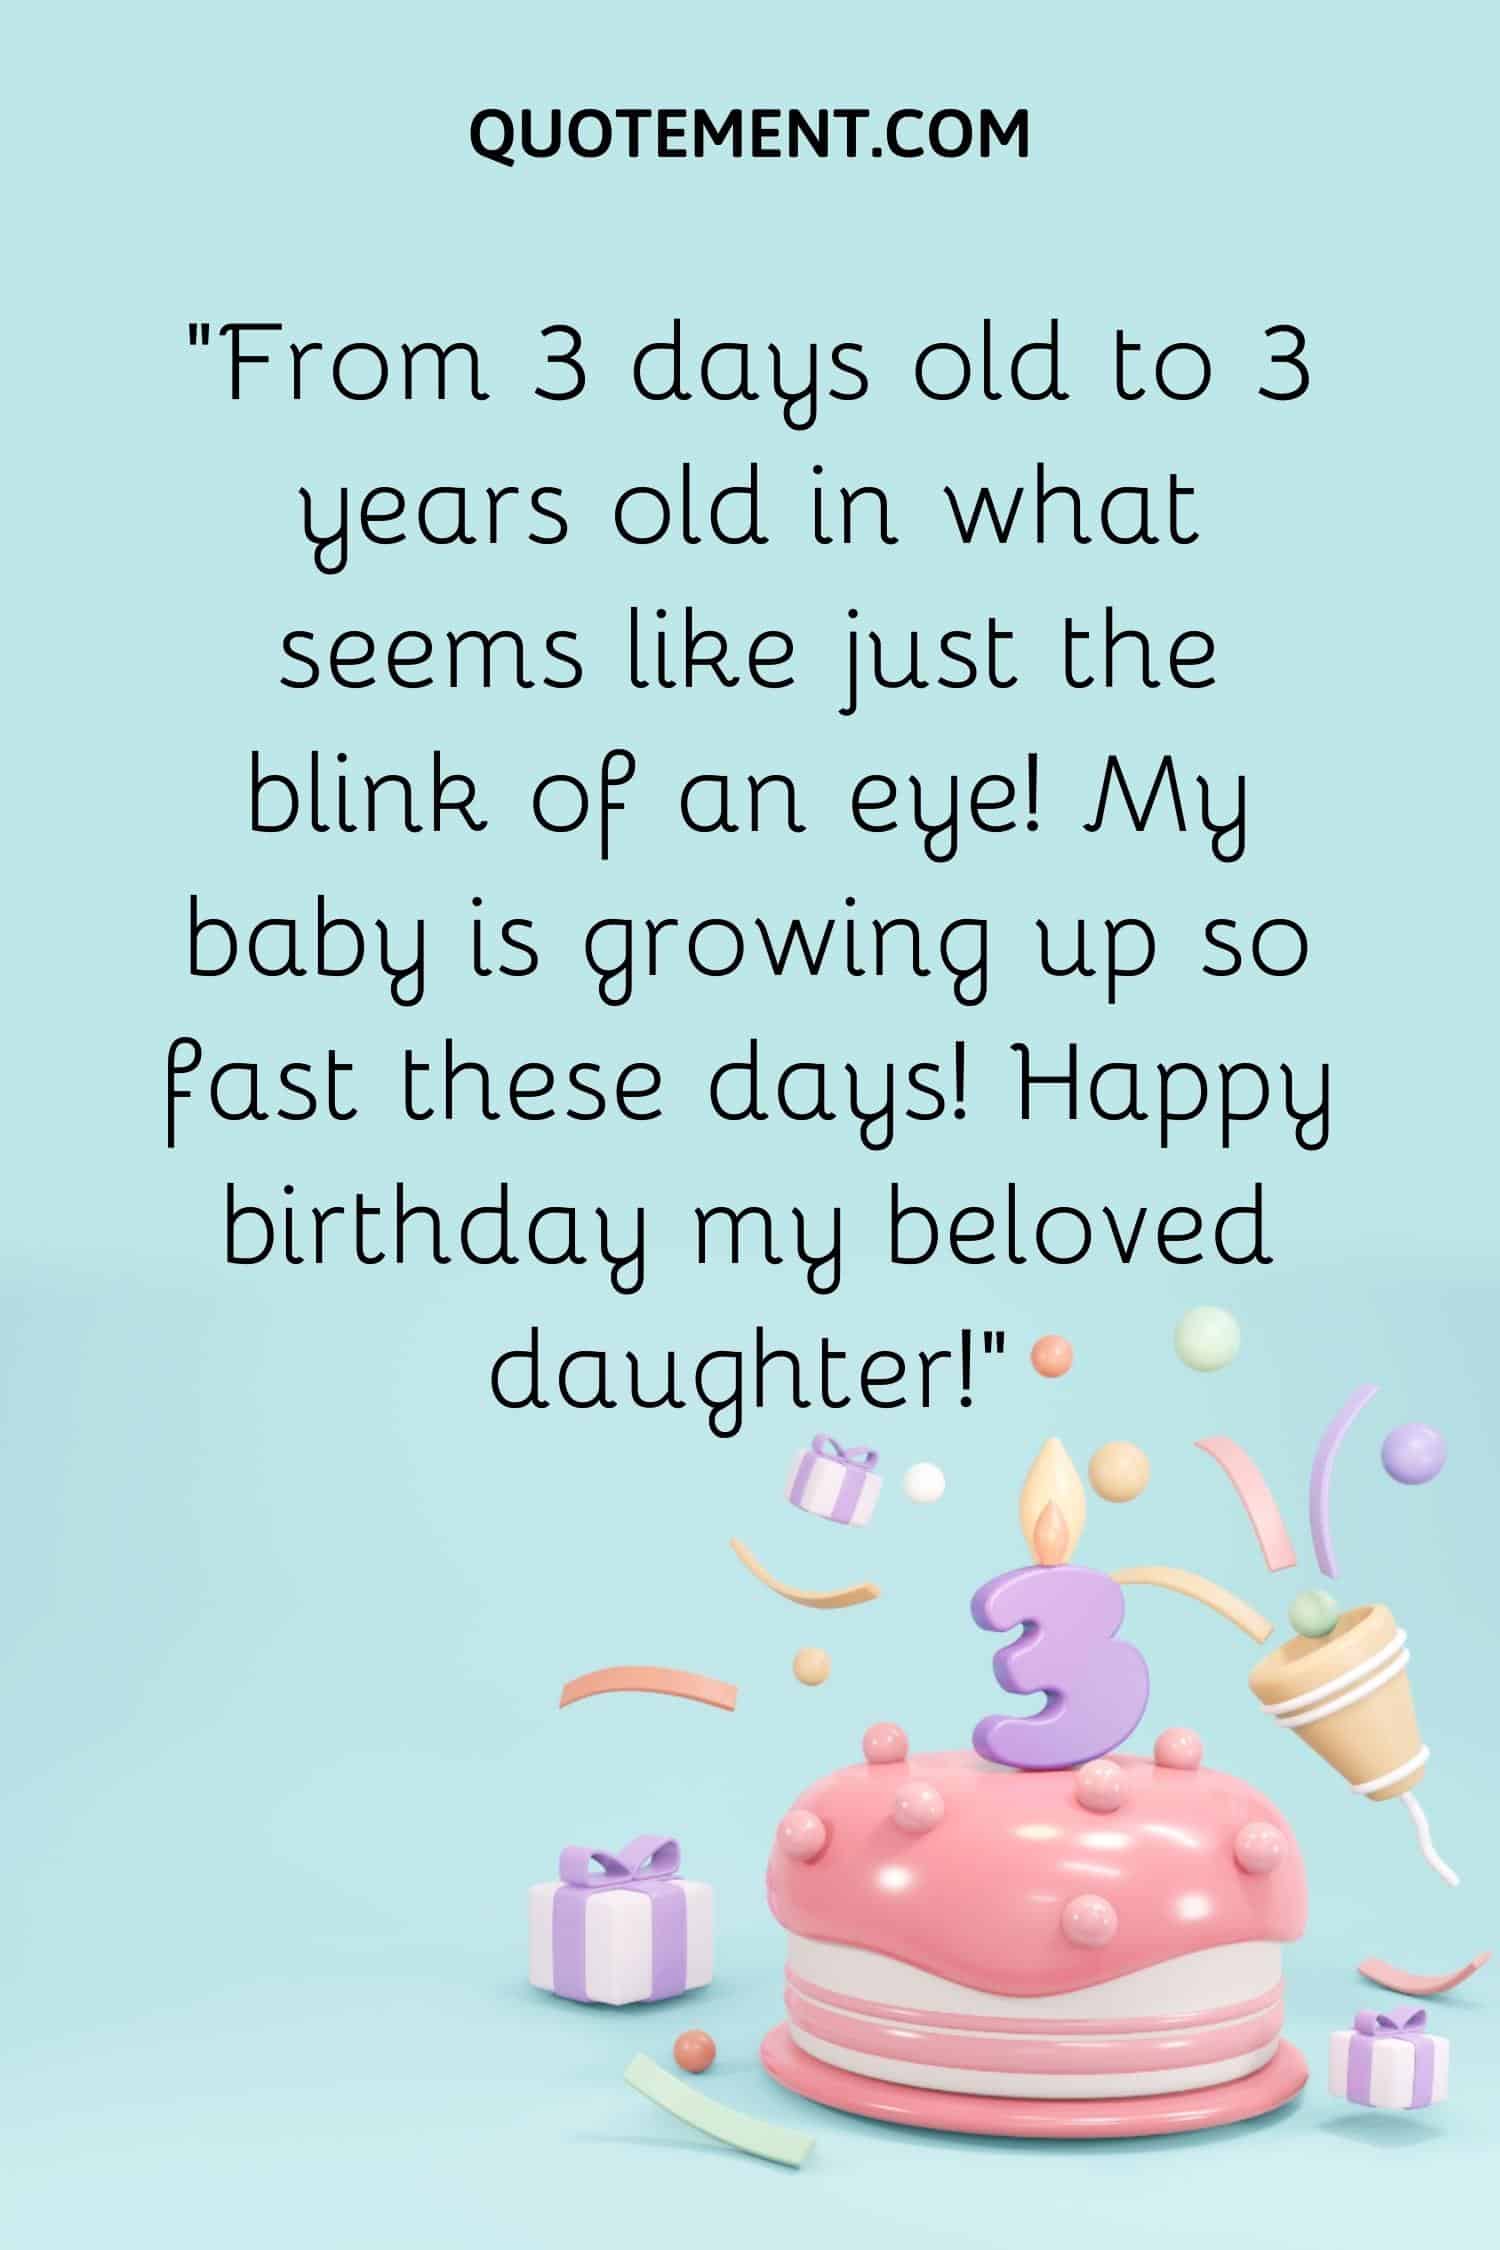 “From 3 days old to 3 years old in what seems like just the blink of an eye! My baby is growing up so fast these days! Happy birthday my beloved daughter!”